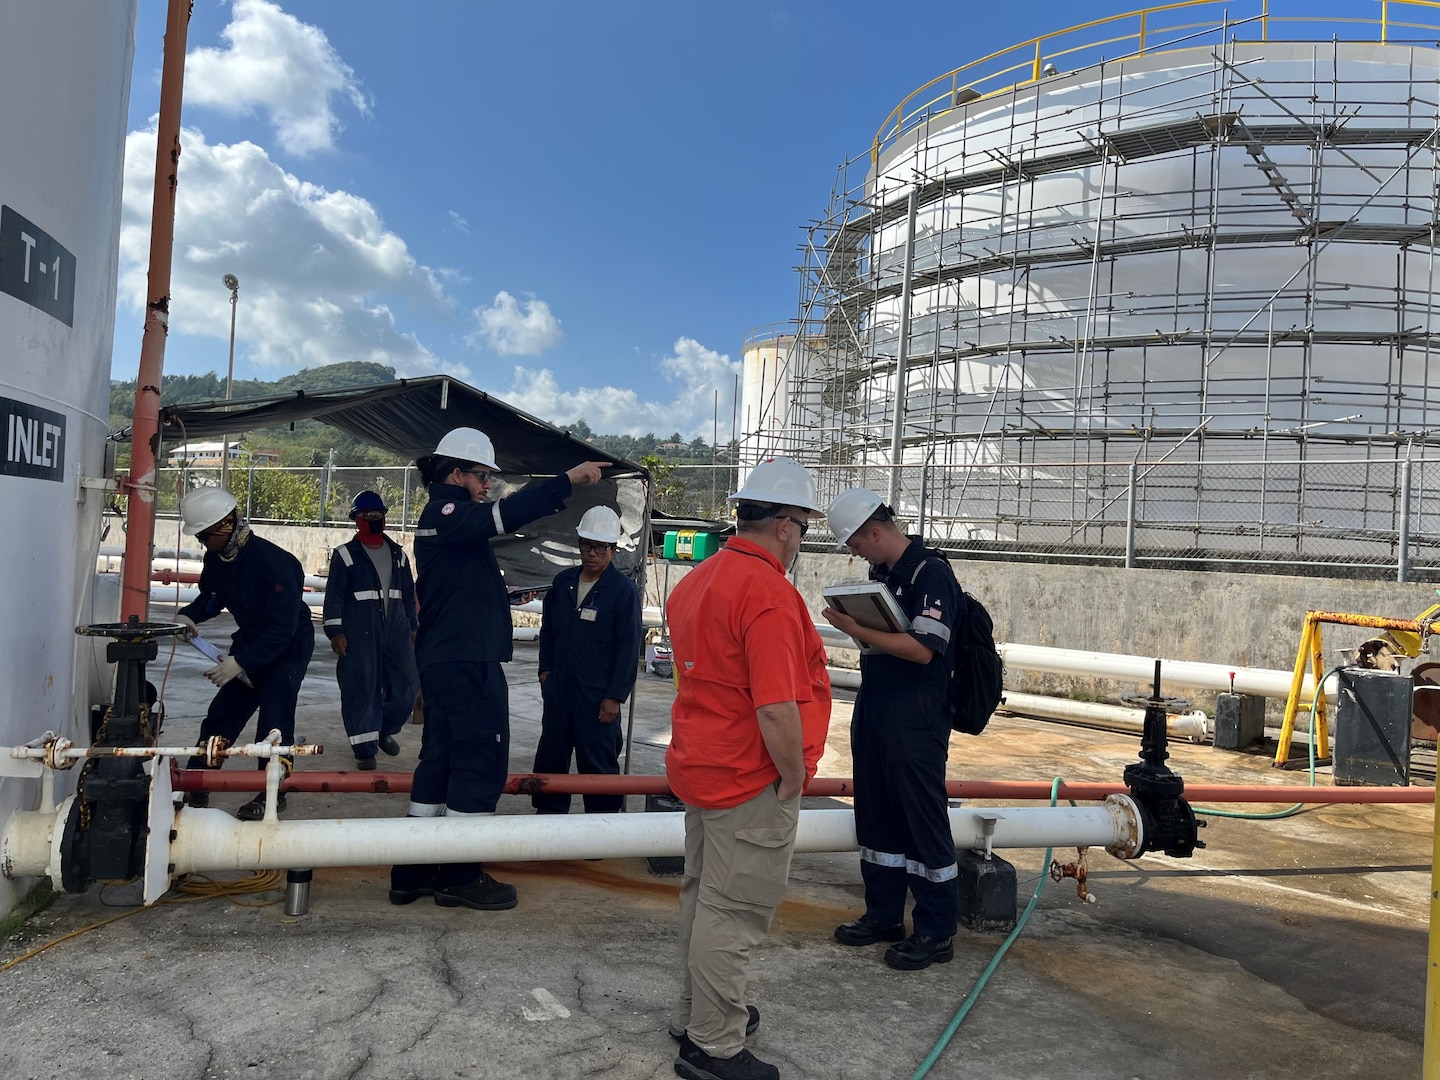 U.S. Coast Guard members observe a Government-Initiated Unannounced Exercise (GIUE) at Mobil Saipan on Feb. 29, 2024, in Saipan, Commonwealth of the Northern Mariana Islands. The primary goal of a GIUE is to ensure that the plan holder can effectively implement their response plan during a marine environmental response scenario. (U.S. Coast Guard photo by Lt. Justin Miller)